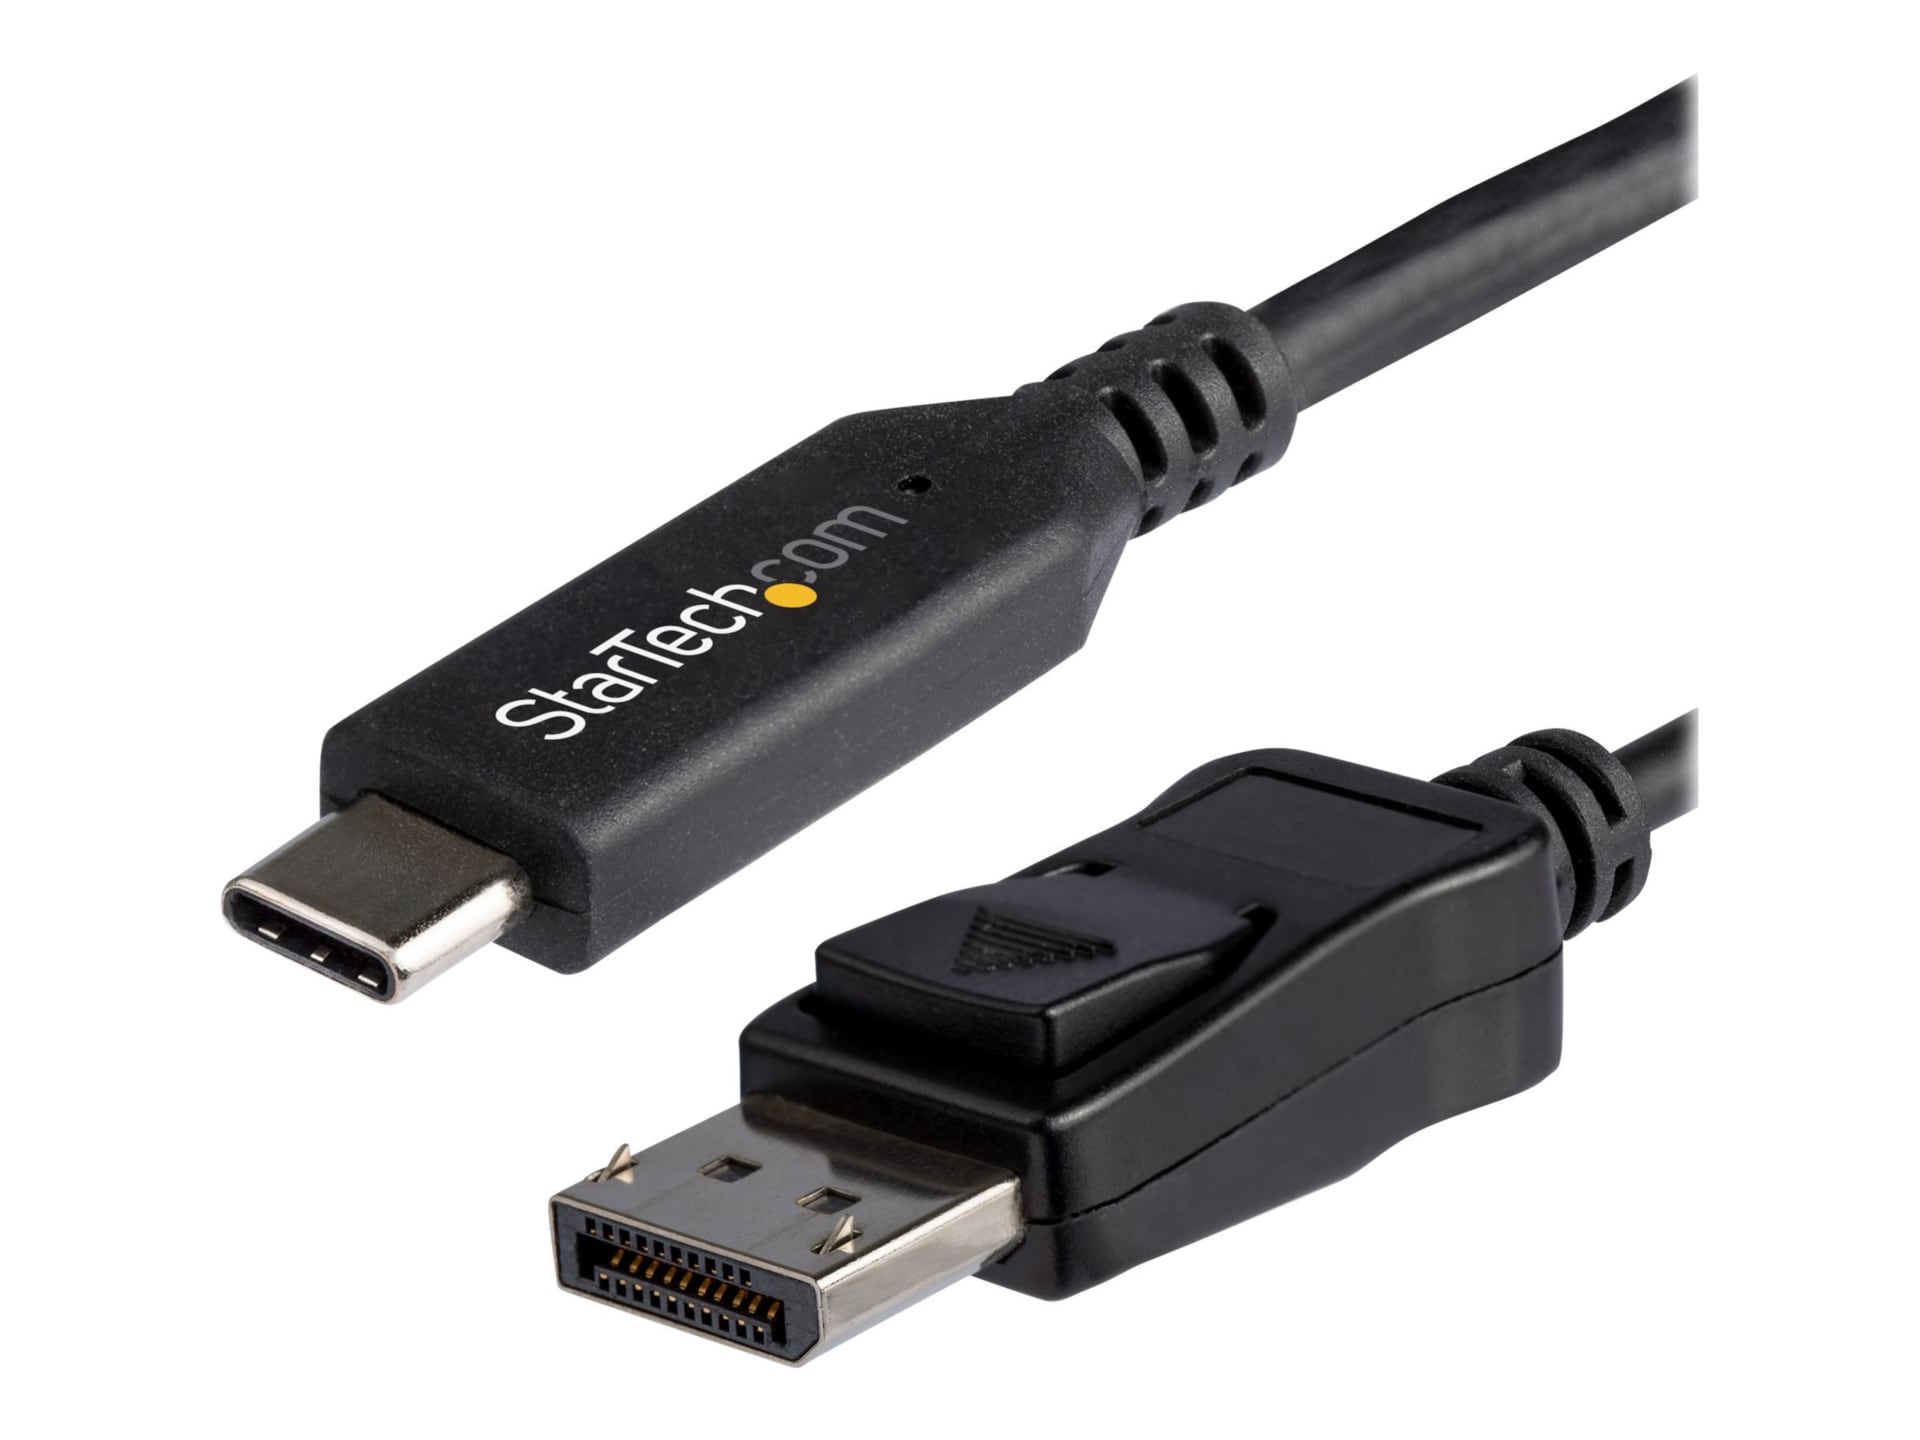 Cable Matters USB C to DisplayPort 1.4 Cable (USB-C to DisplayPort Cable,  USB C to DP Cable) Supporting 8K 60Hz in Black 6 ft - Thunderbolt 4 /USB4